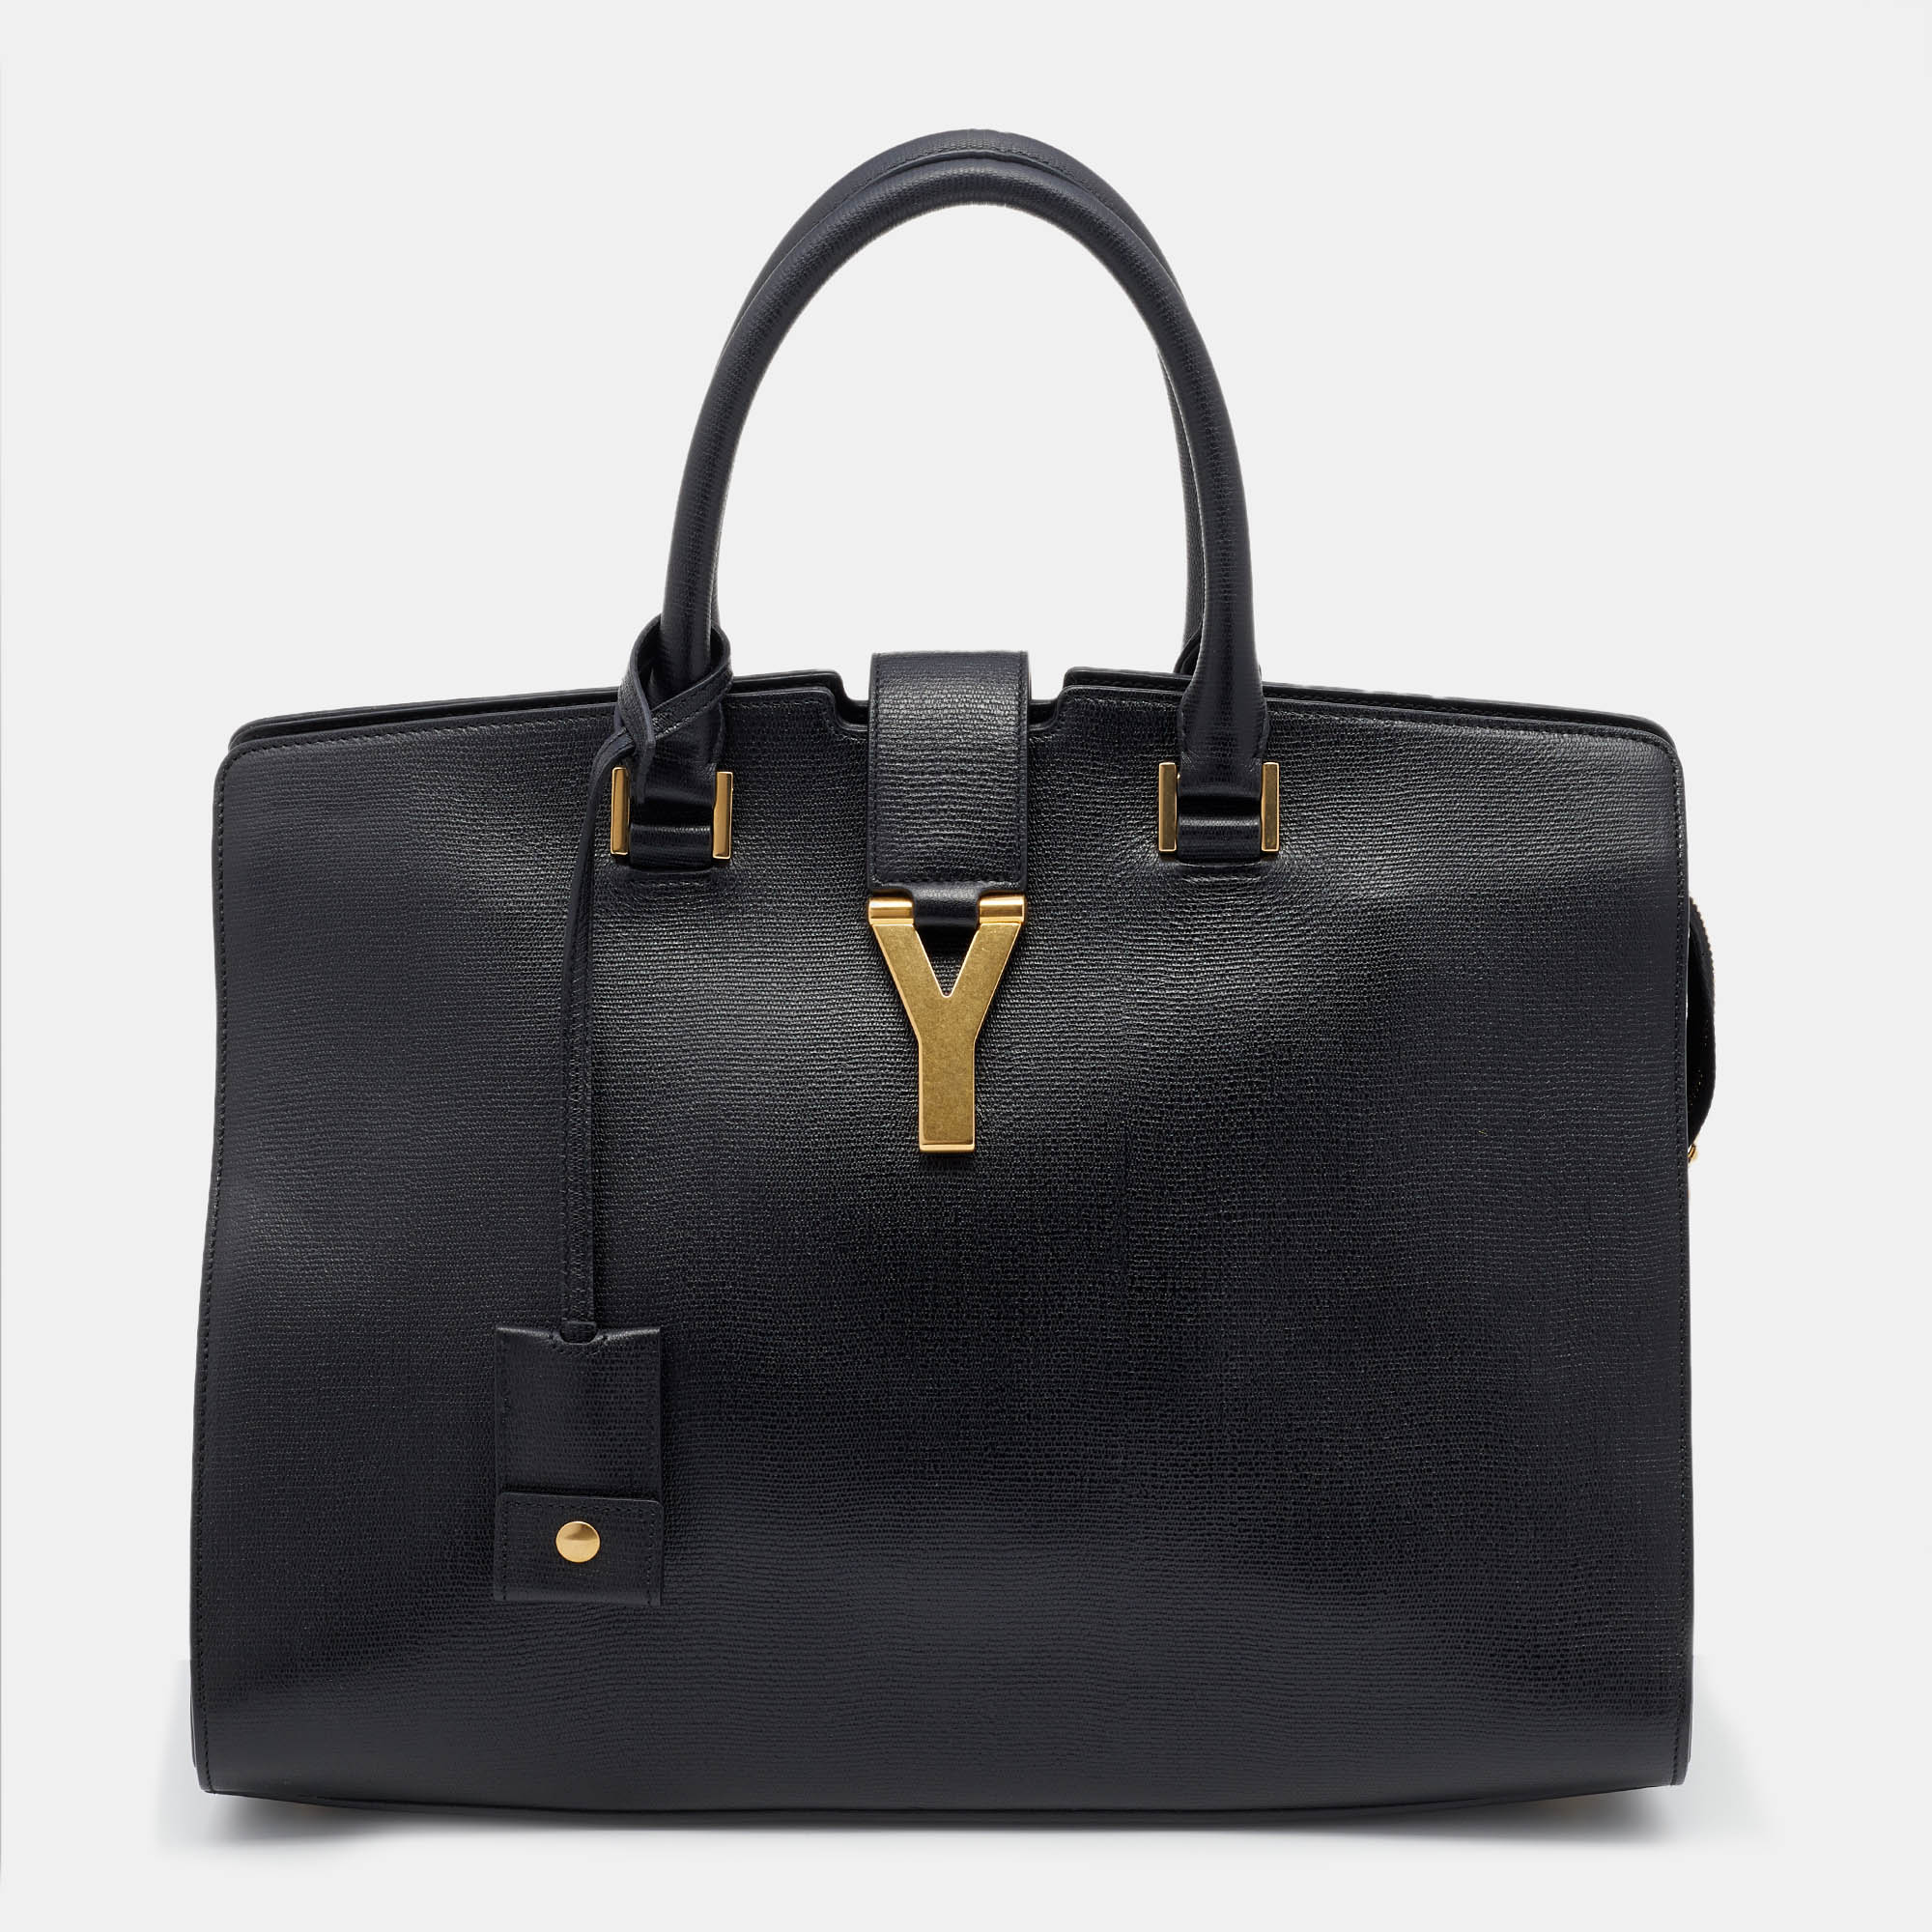 Pre-owned Saint Laurent Black Leather Medium Cabas Chyc Tote